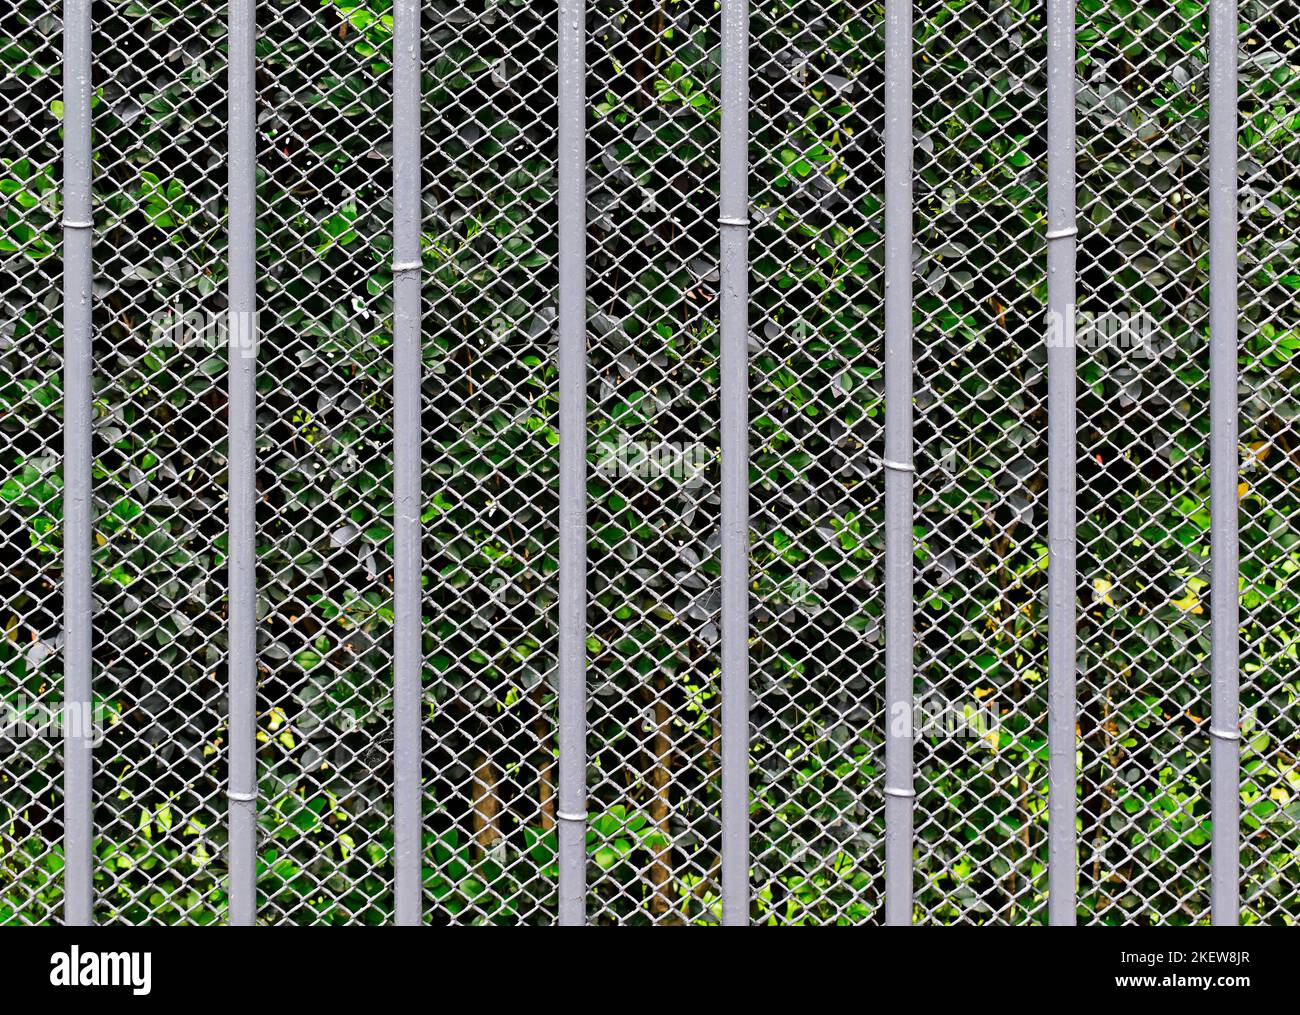 Iron bars and wire mesh background on garden Stock Photo